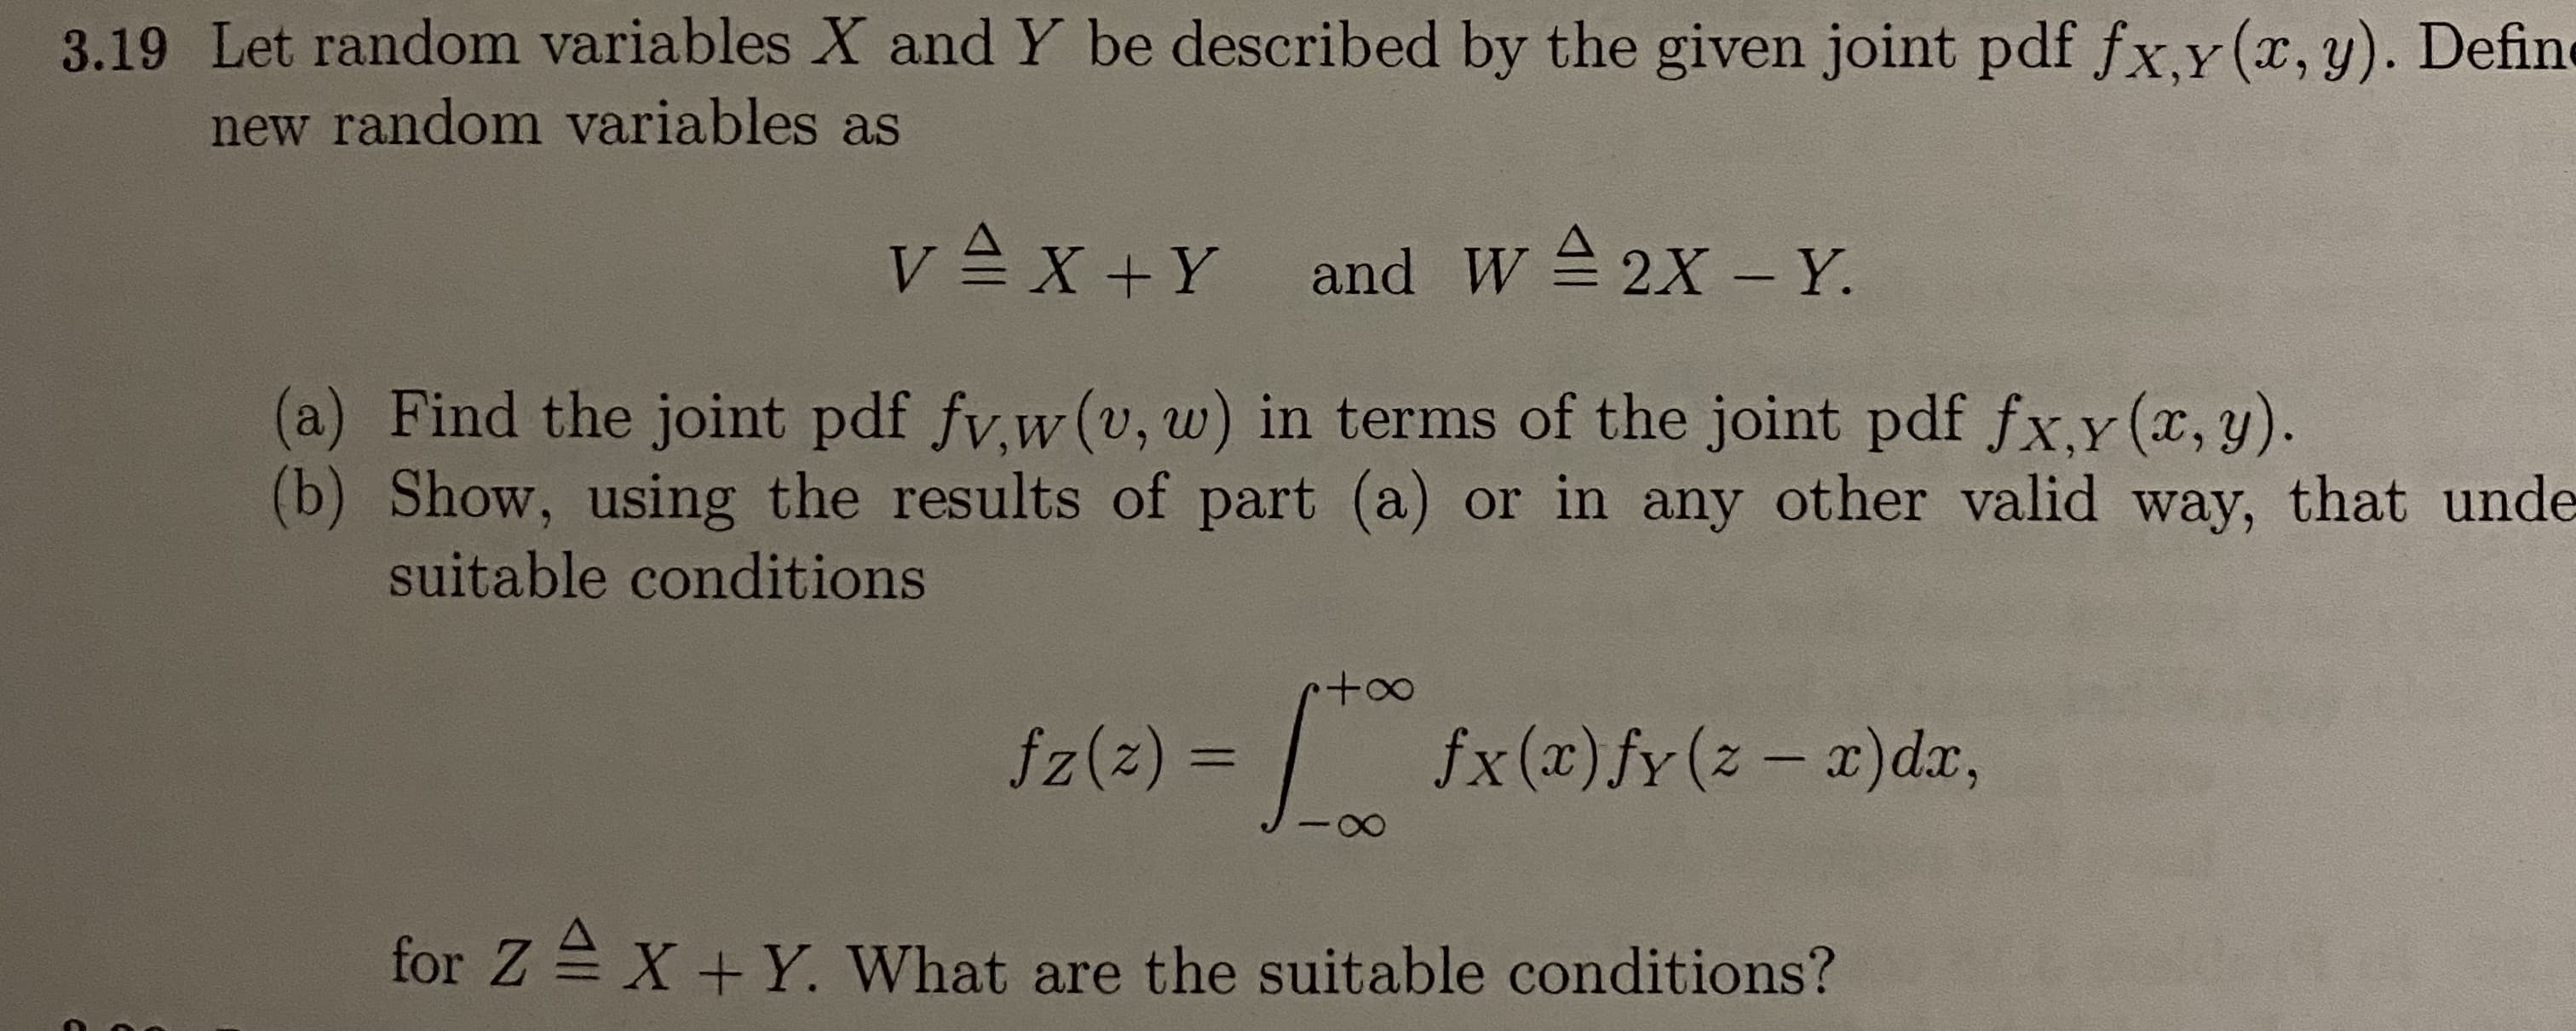 3.19 Let random variables X and Y be described by the given joint pdf fx,y(x,y). Define
new random variables as
v =x +Y and W 2X - Y.
(a) Find the joint pdf fv,w(v, w) in terms of the joint pdf fx,y (x, y).
(b) Show, using the results of part (a) or in any other valid way, that unde
suitable conditions
fz(z) =
|
fx(x)fy(z – x)dx,
%3D
for Z = X + Y. What are the suitable conditions?
